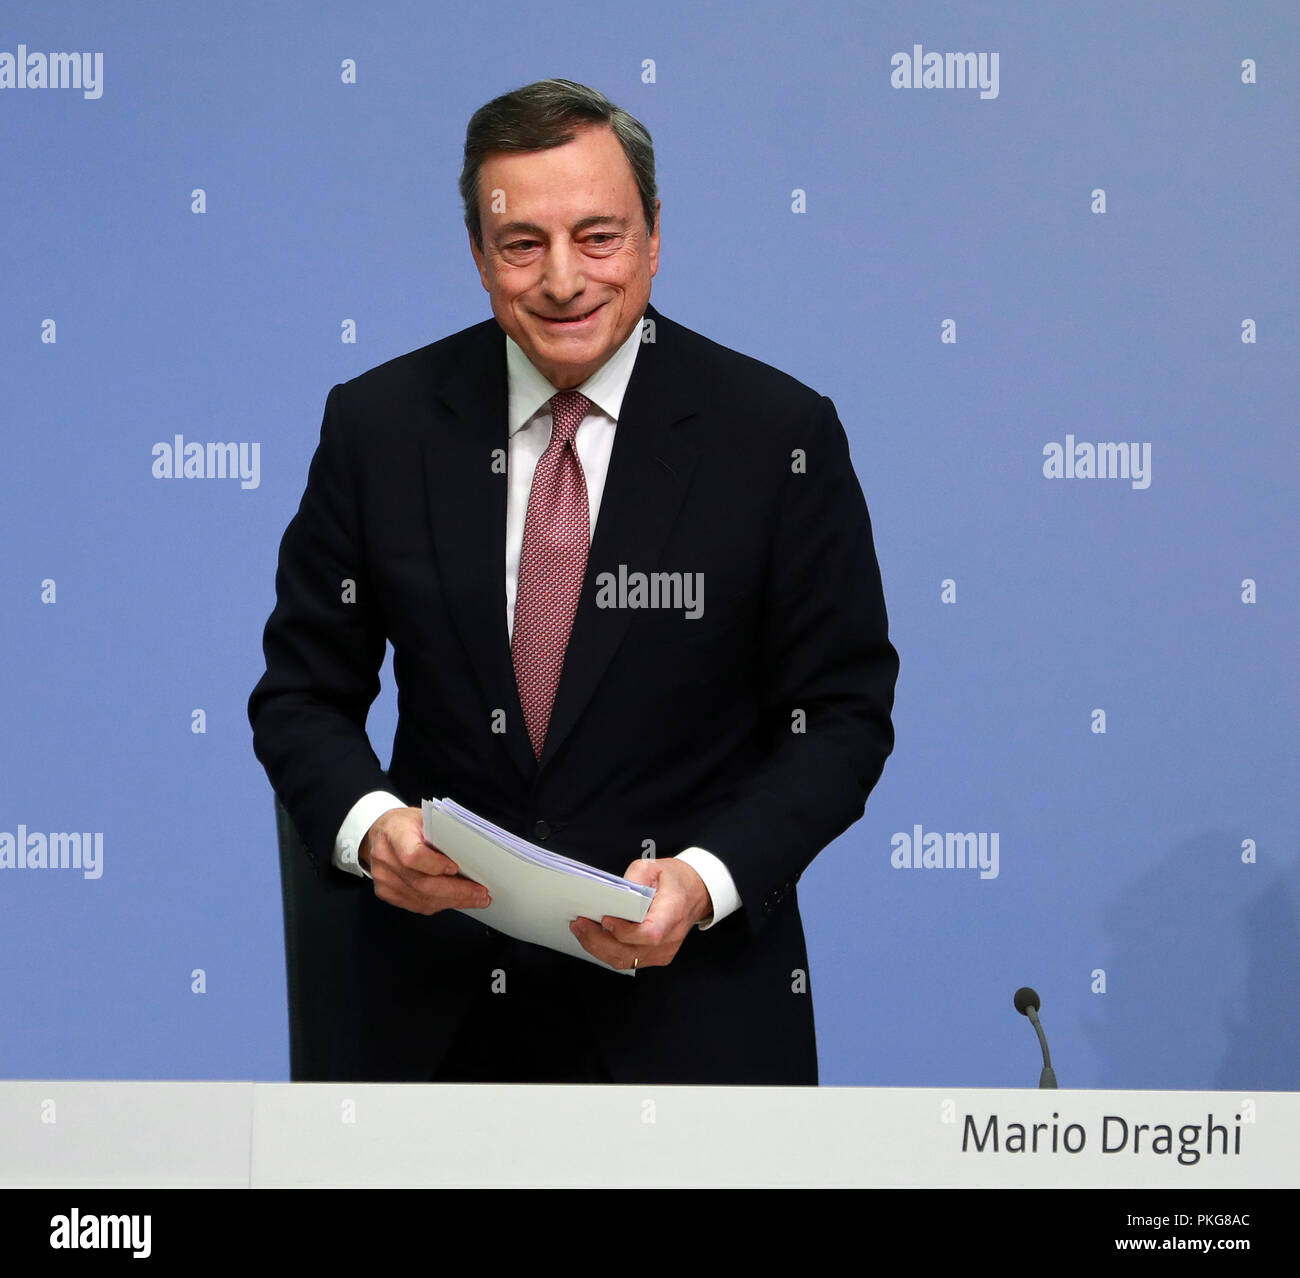 Frankfurt, Germany. 13th Sep, 2018. The European Central Bank (ECB) President Mario Draghi attends a press conference at the ECB headquarters in Frankfurt, Germany, on Sept. 13, 2018. The ECB on Thursday decided to maintain the key interest rates for the euro area unchanged. Credit: Luo Huanhuan/Xinhua/Alamy Live News Stock Photo